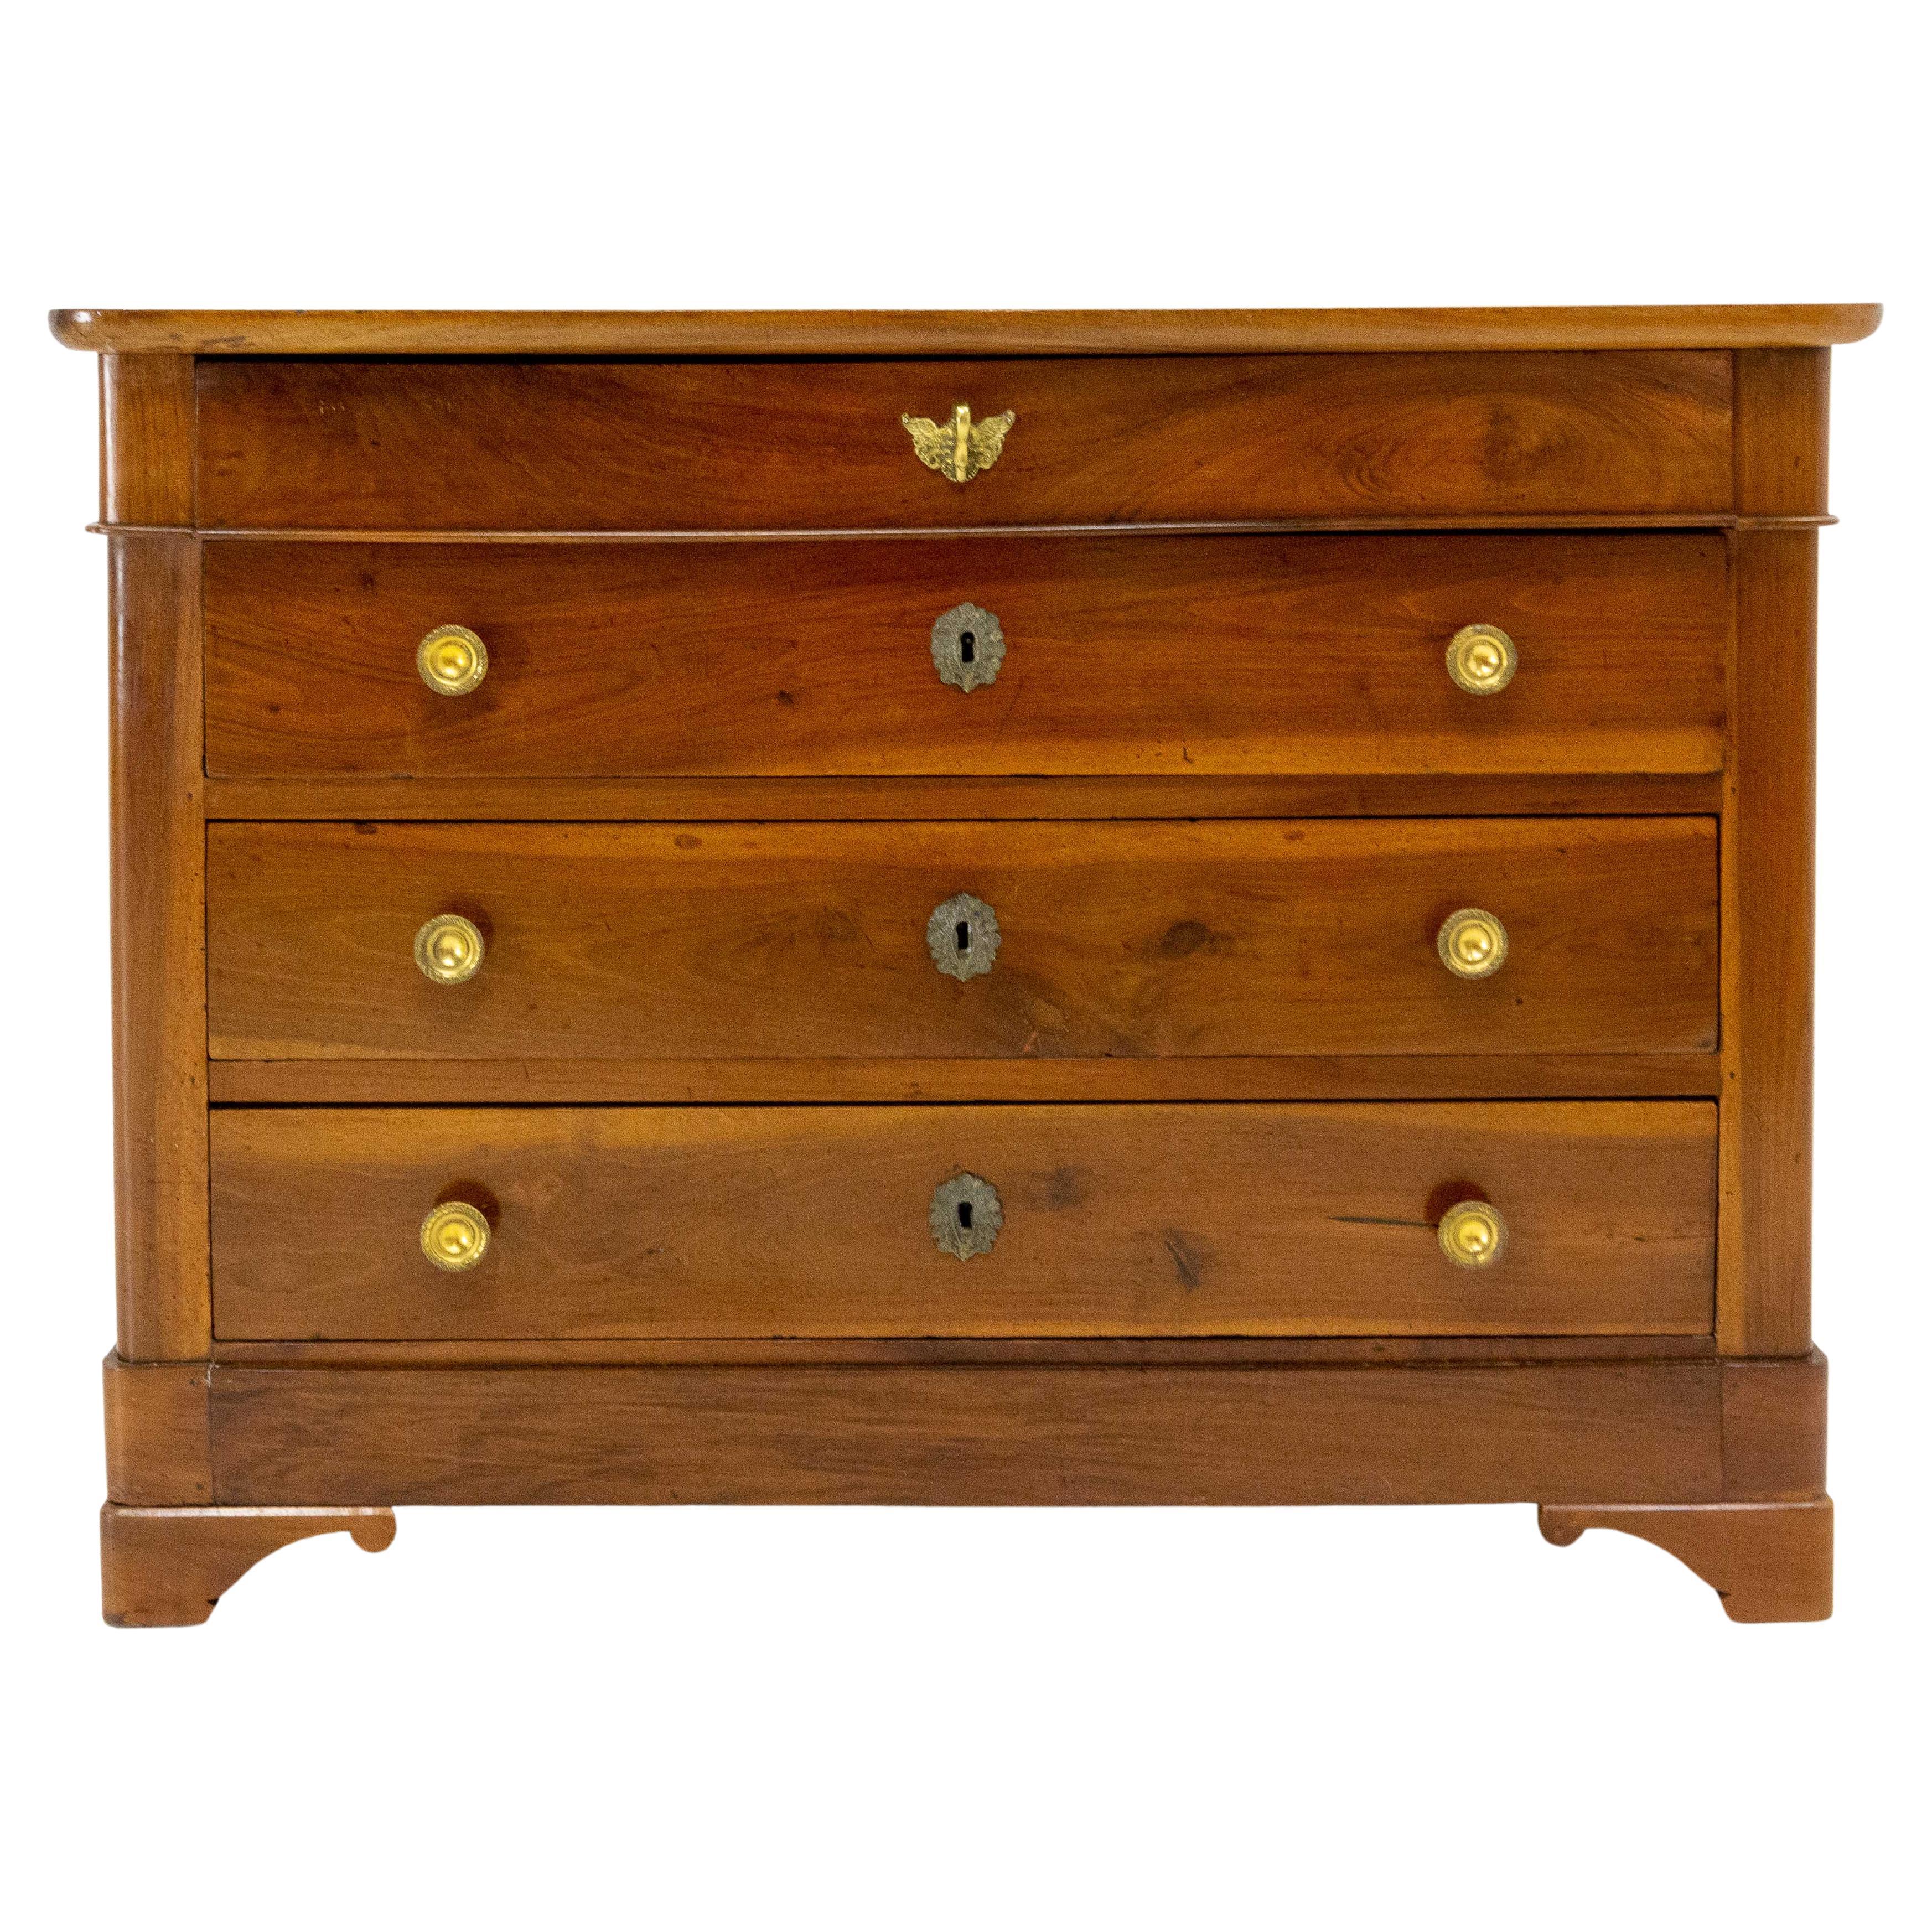 French Empire Style Walnut Commode Chest of Drawers, circa 1920